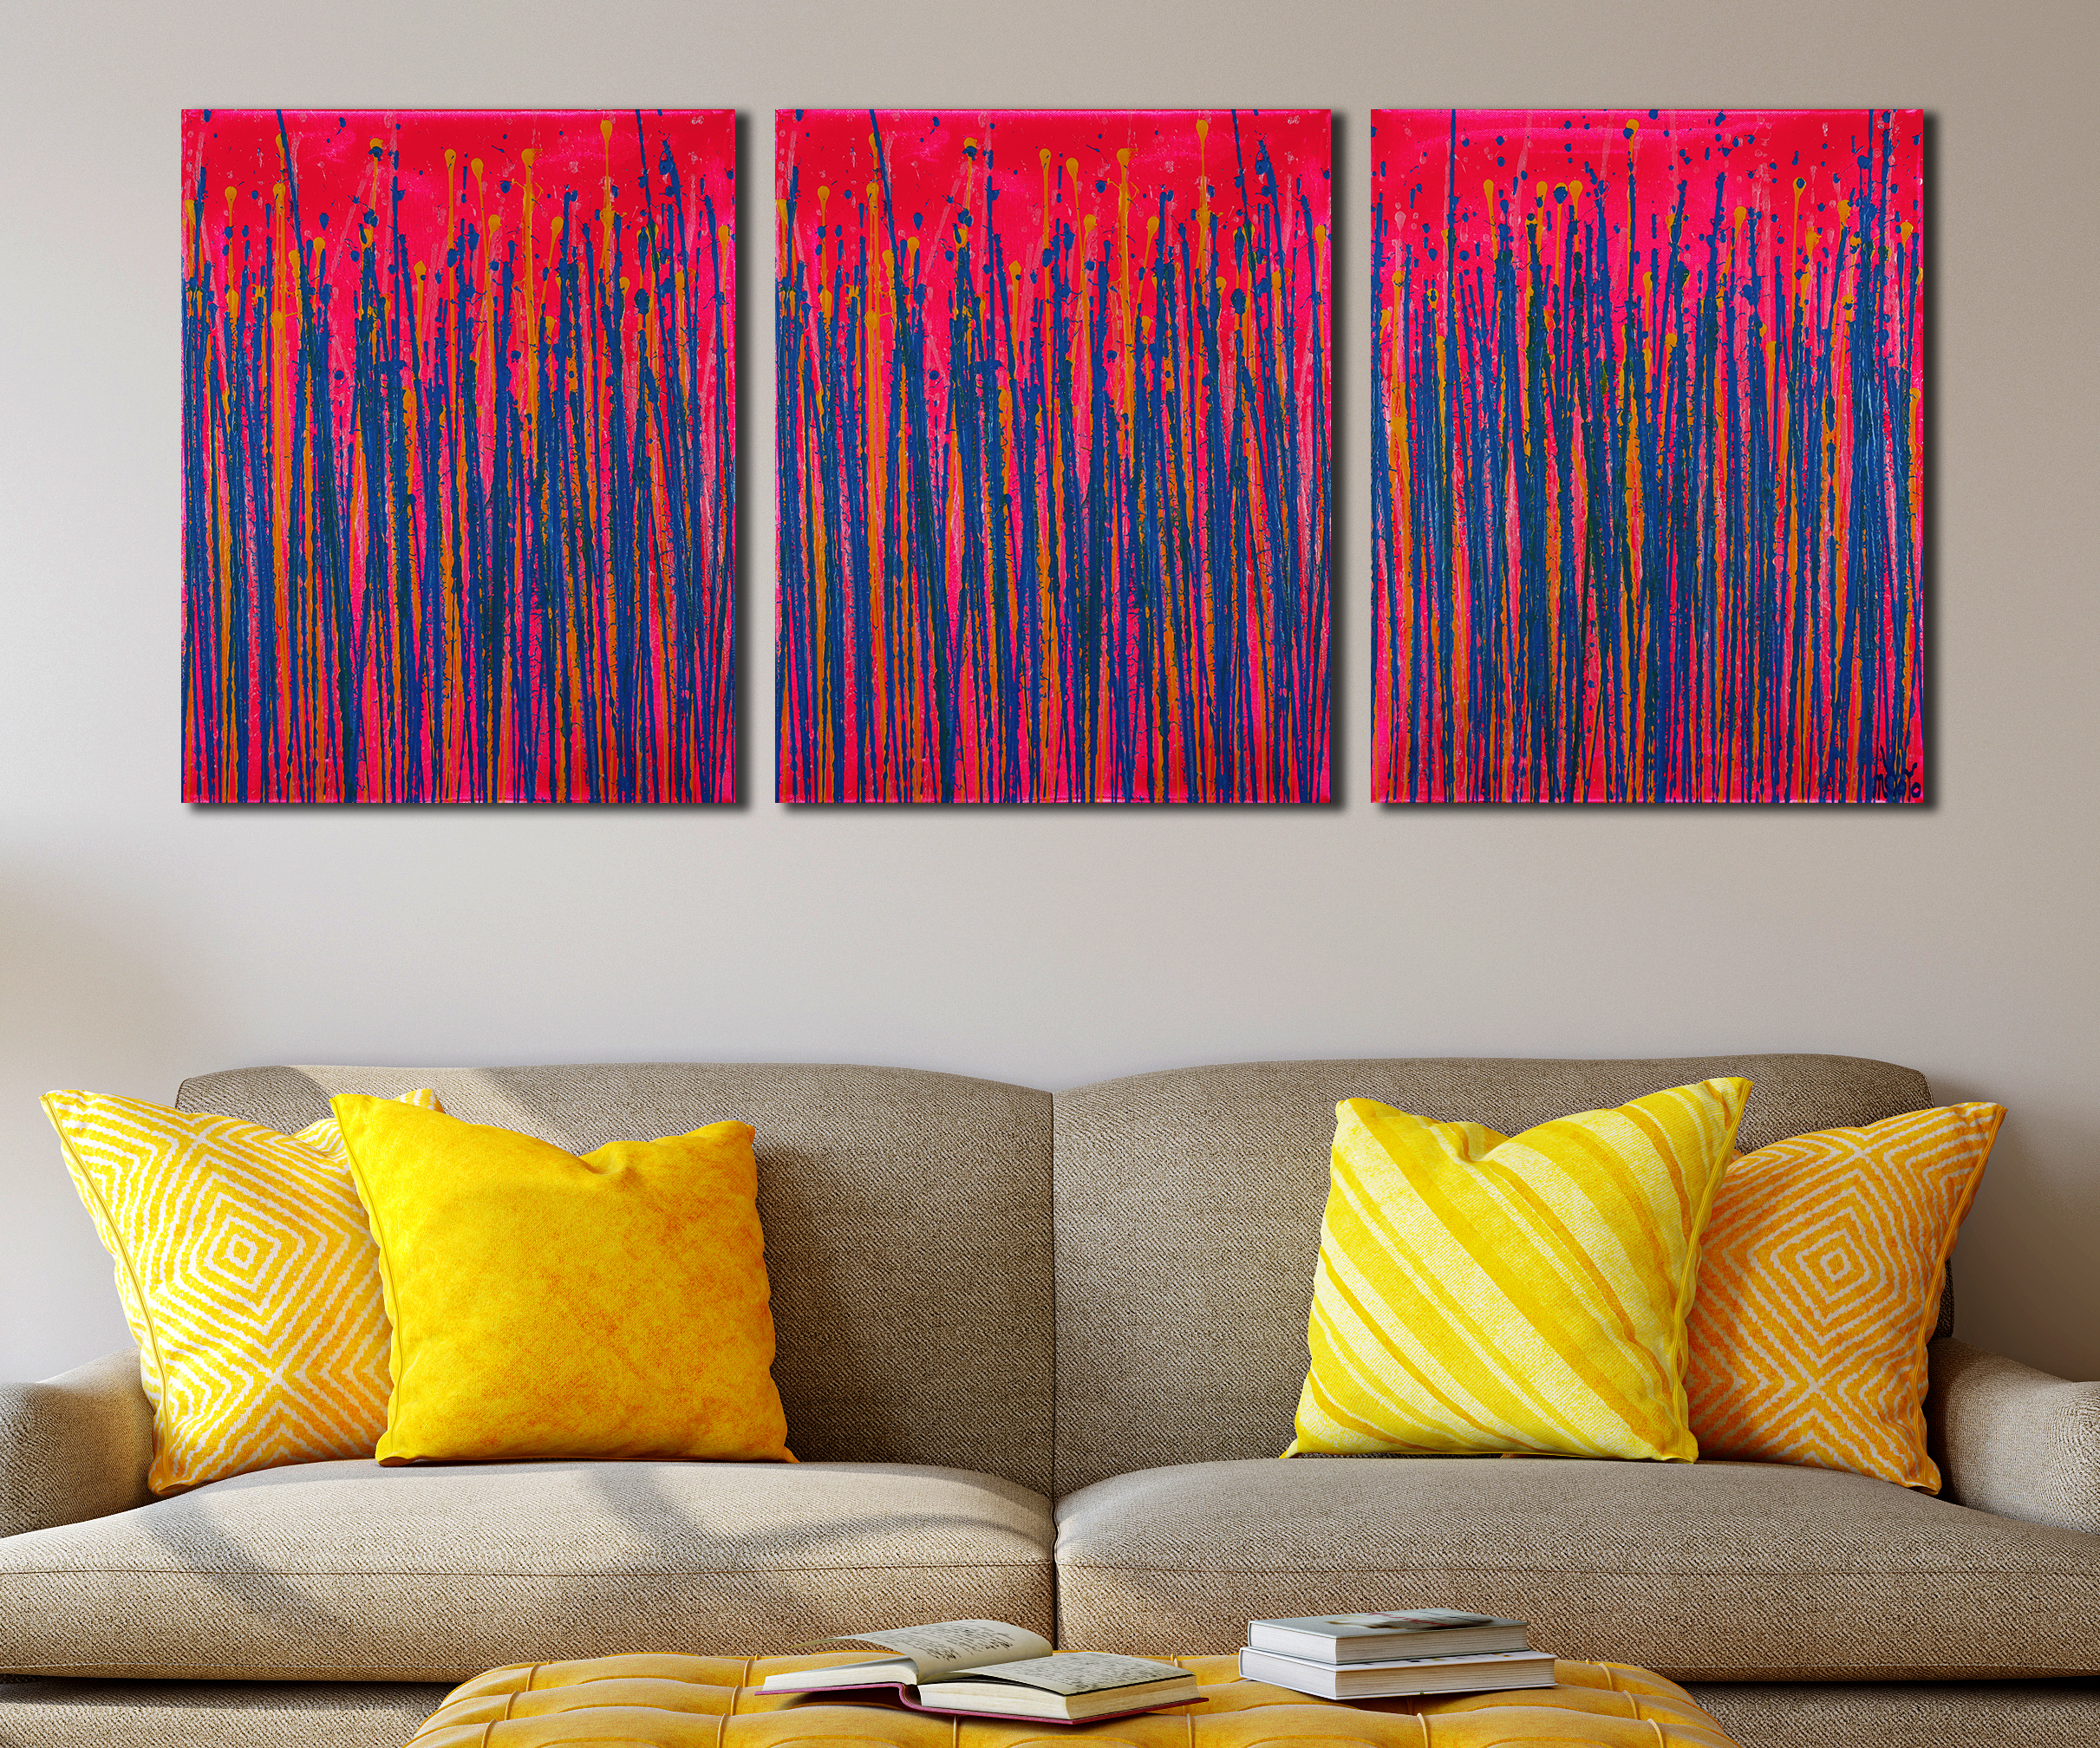 Drizzles Expressions (Over Neon) (2021) / Triptych by painter Nestor Toro